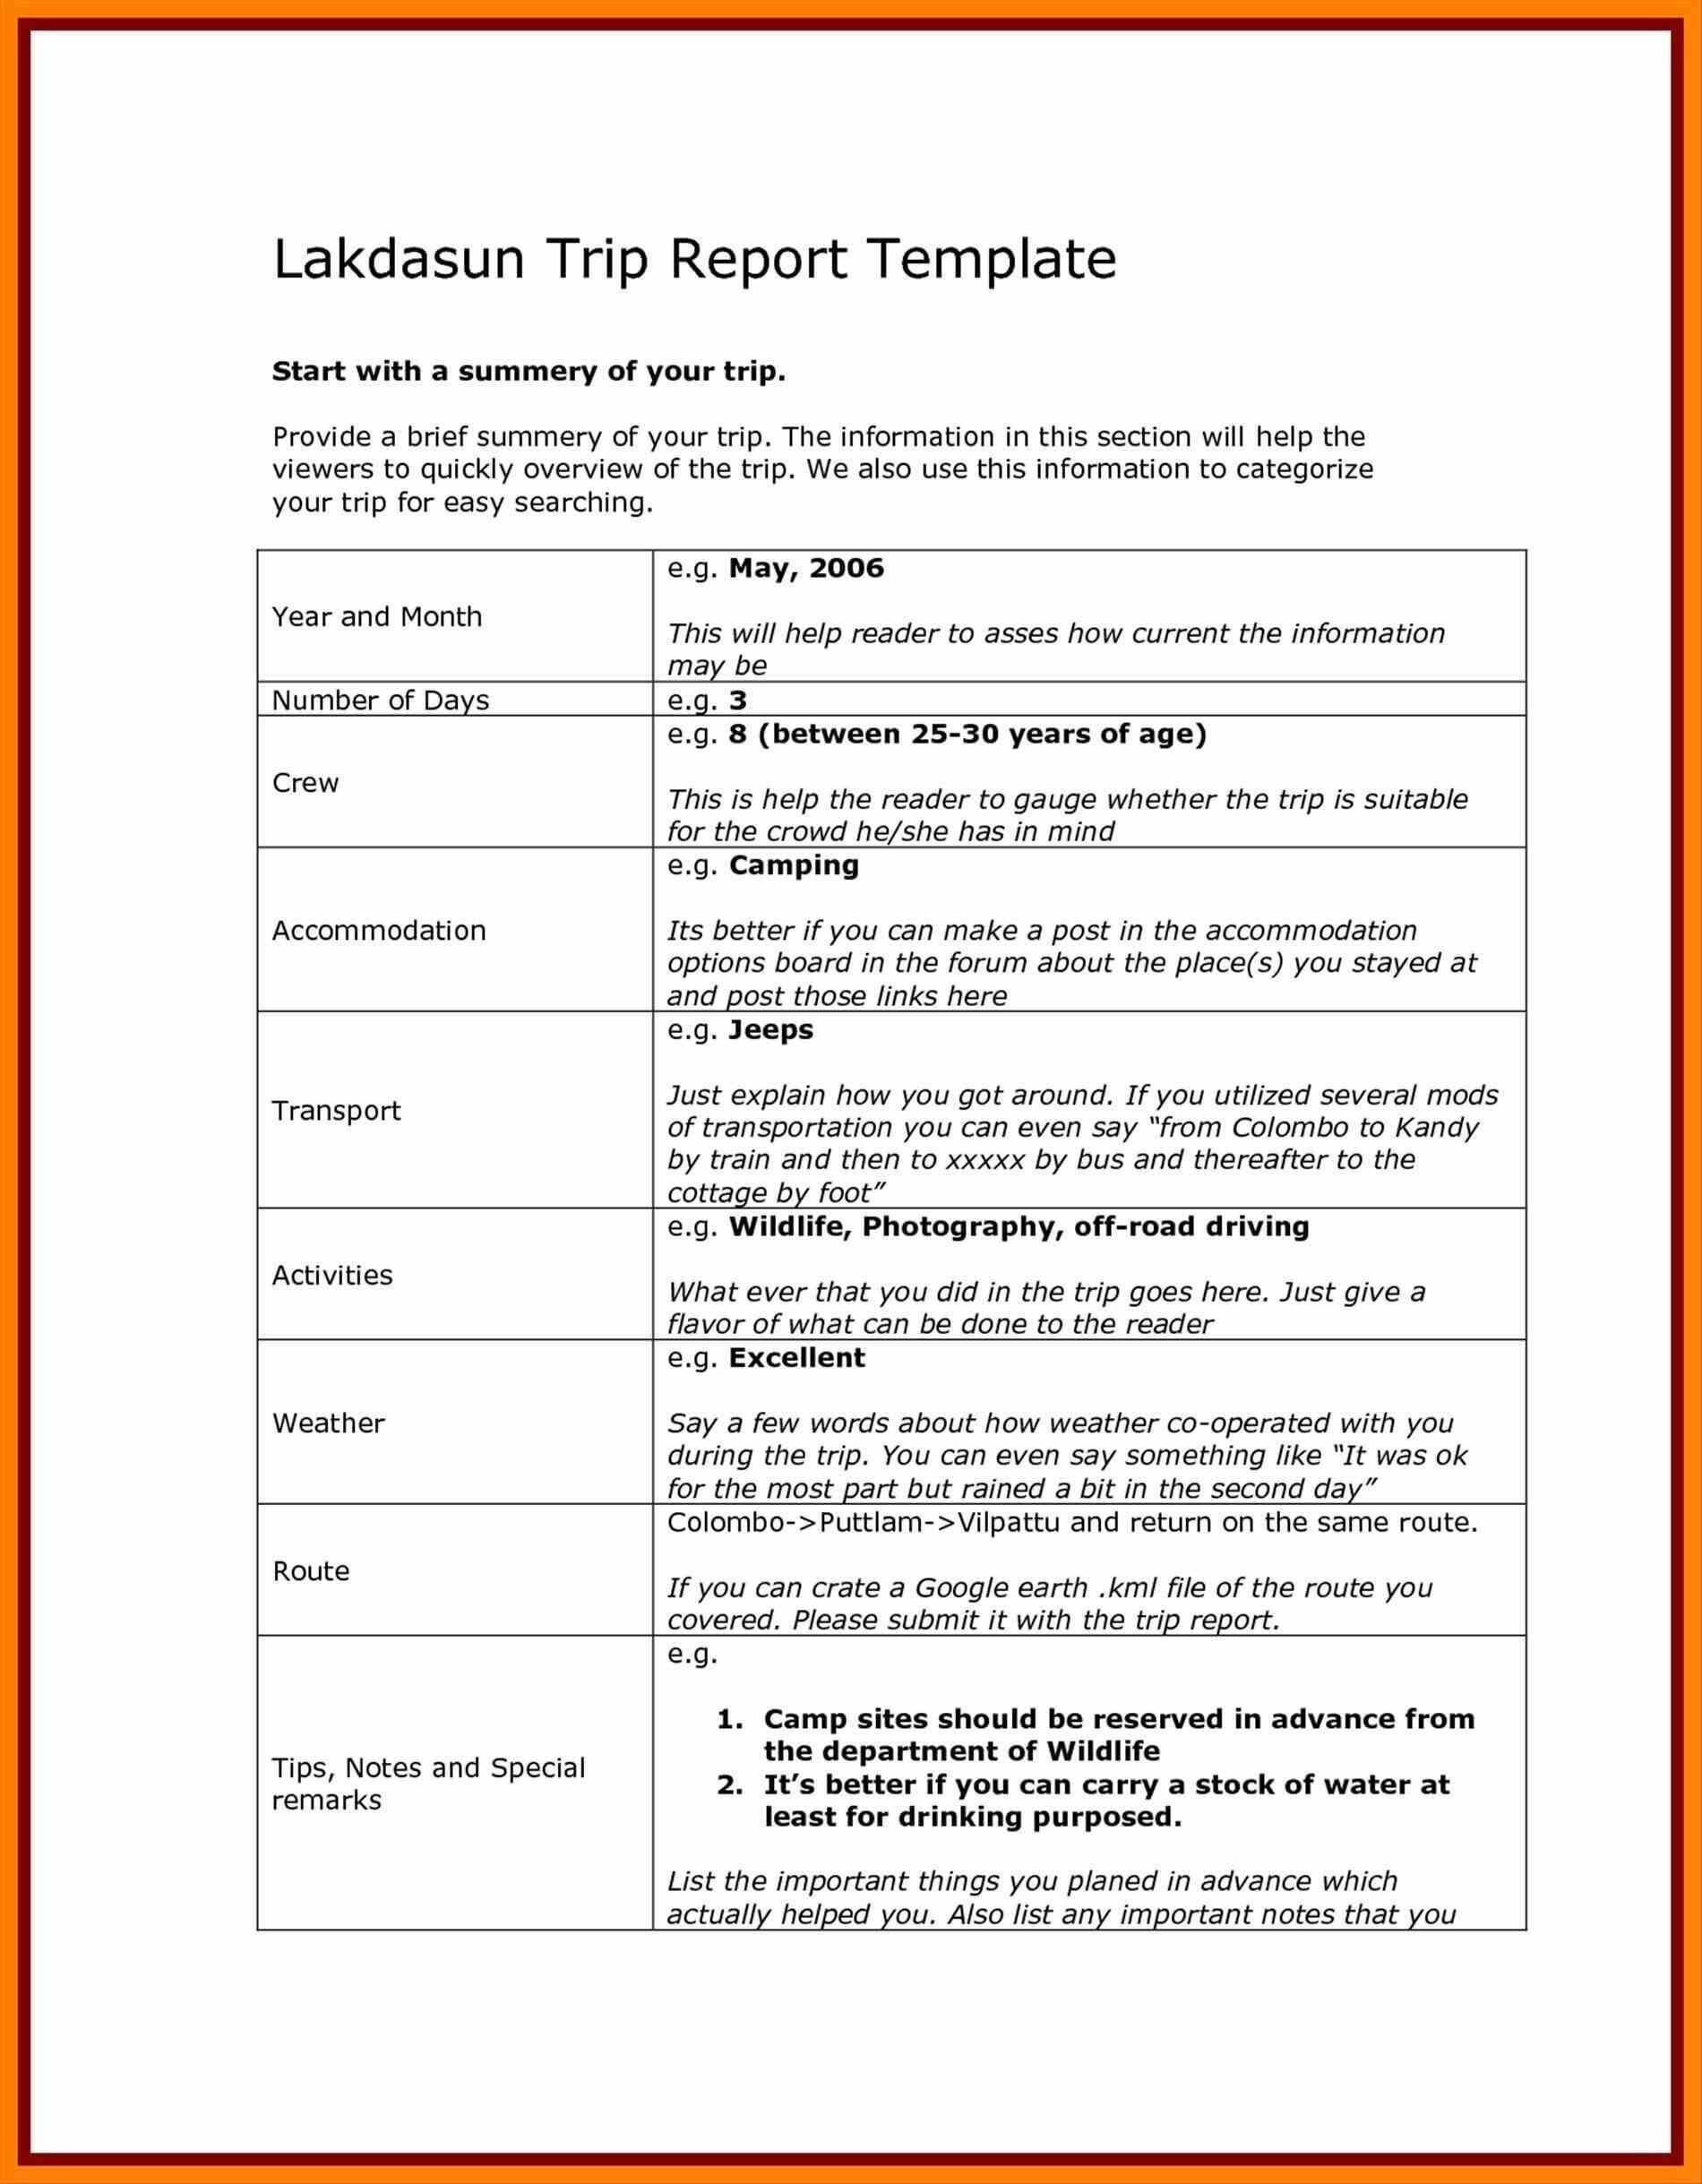 Download New Business Trip Report Template Word Can Save At Regarding Business Trip Report Template